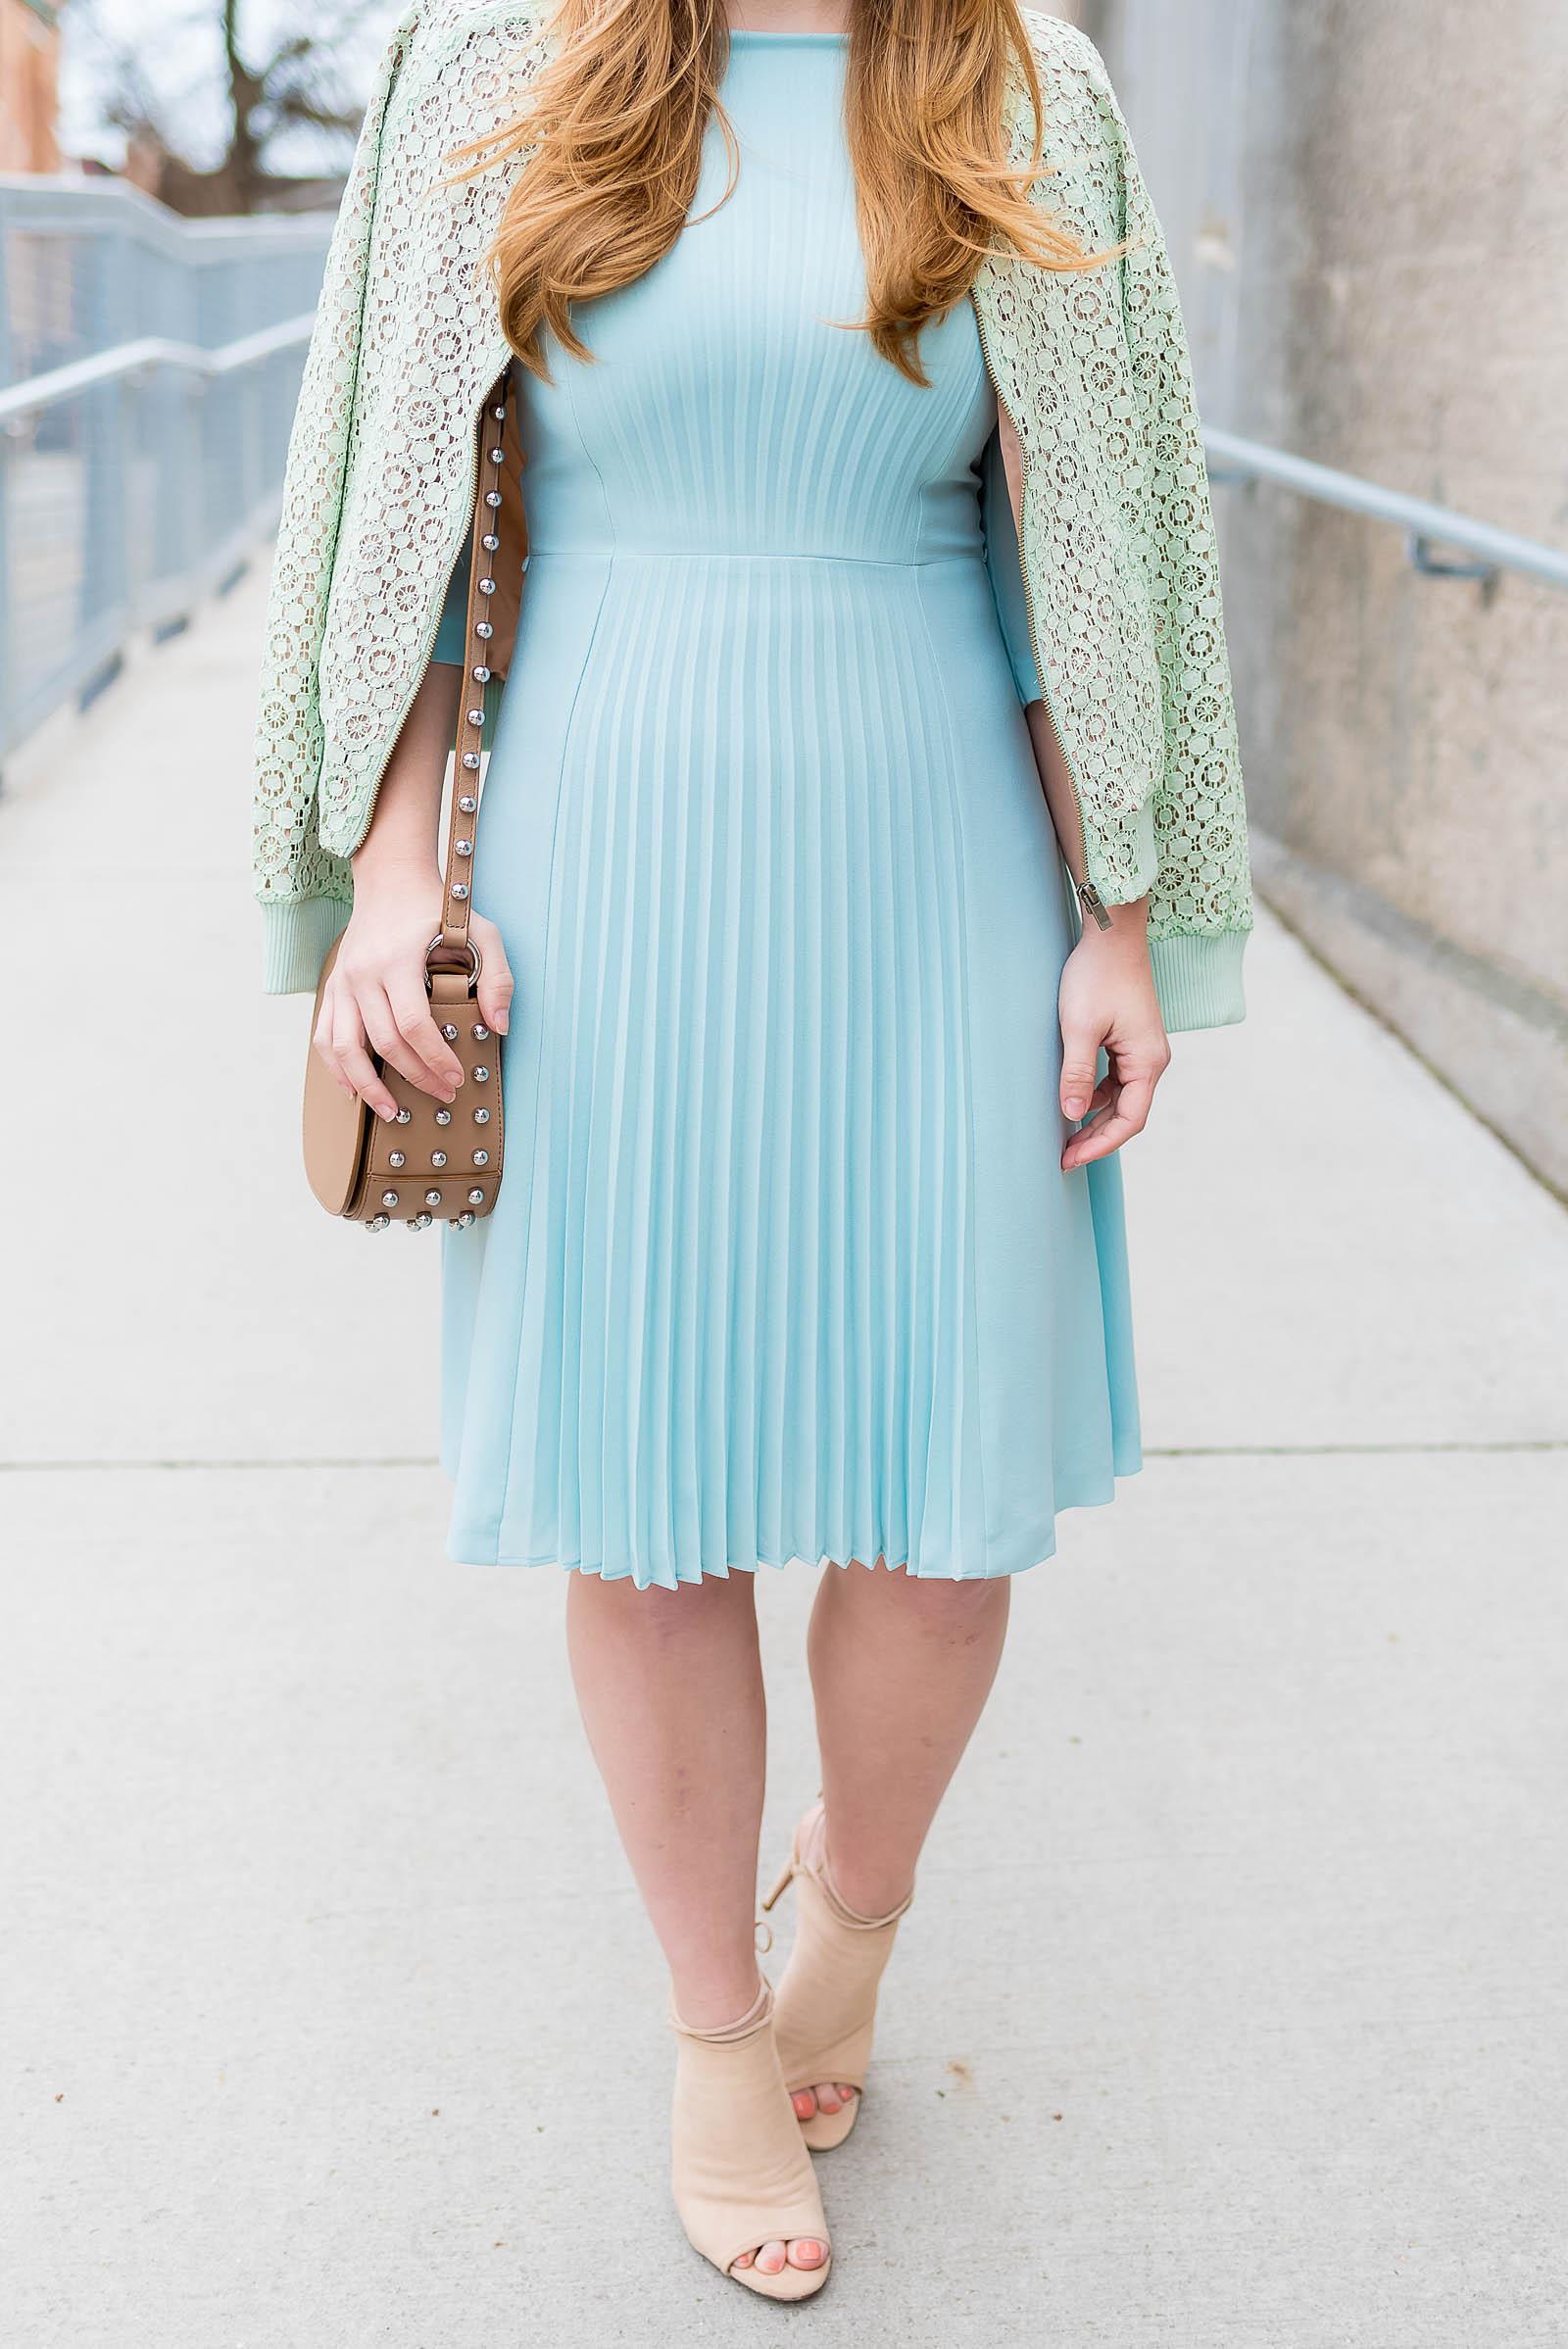 Hugo Boss Duck Blue Pleated Dress, Victoria Beckham for Target Lace Mint Green Bomber Jacket, Aquazzura Mayfair Booties in Nude Suede, Alexander Wang Lia Mini Studded Bag